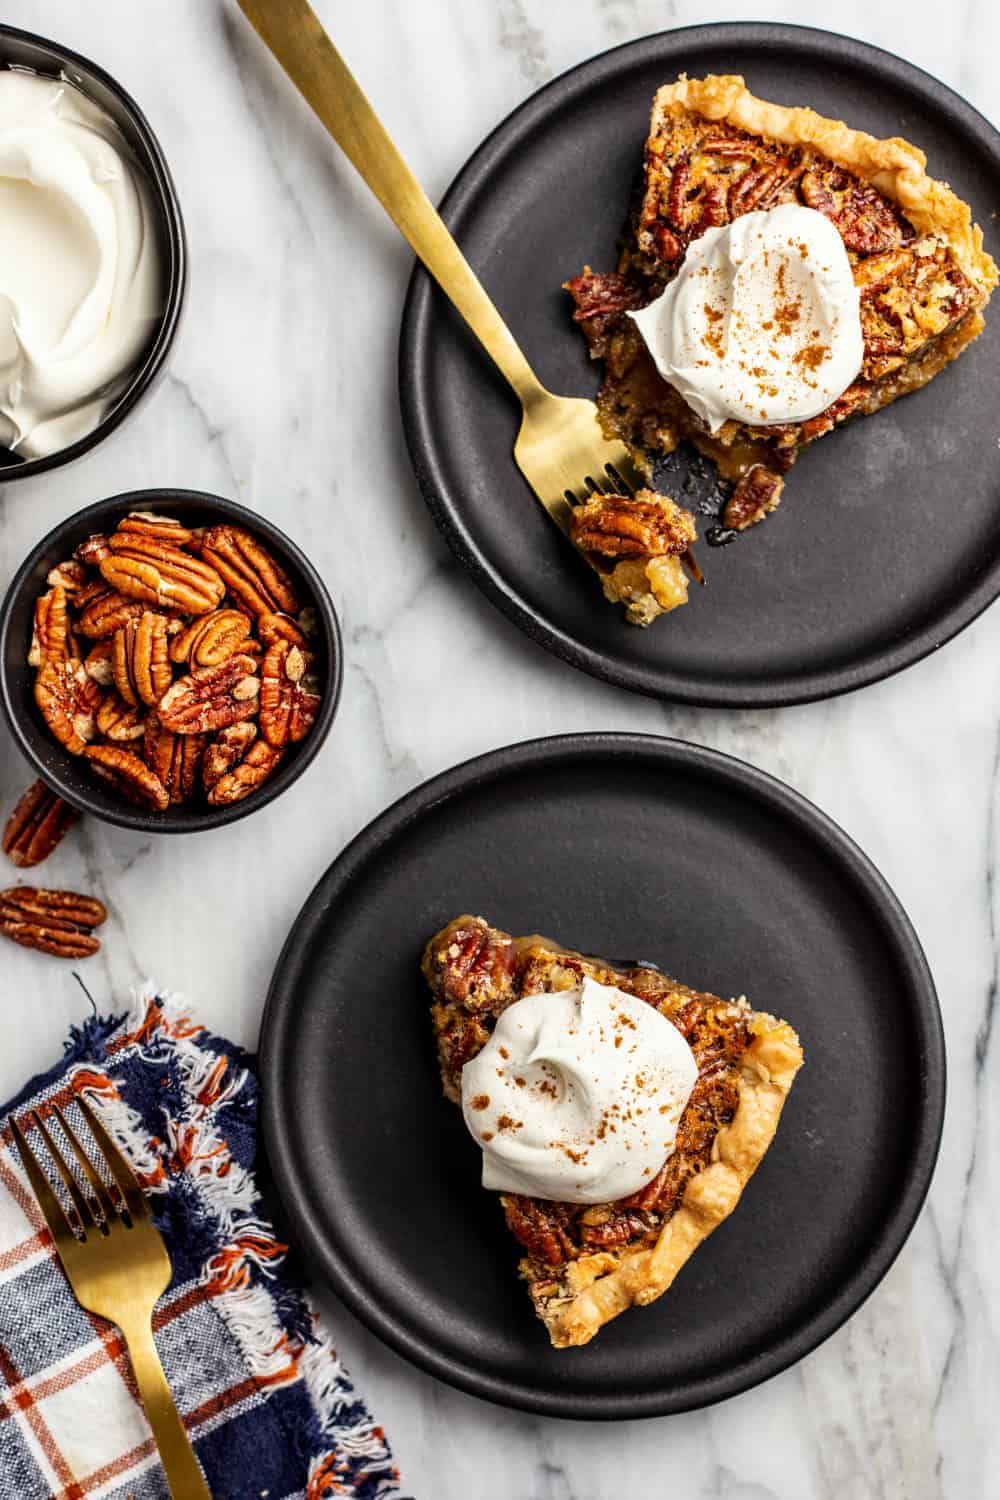 Slices of pecan pie on black plates arranged next to a bowl of pecans and a bowl of whipped cream